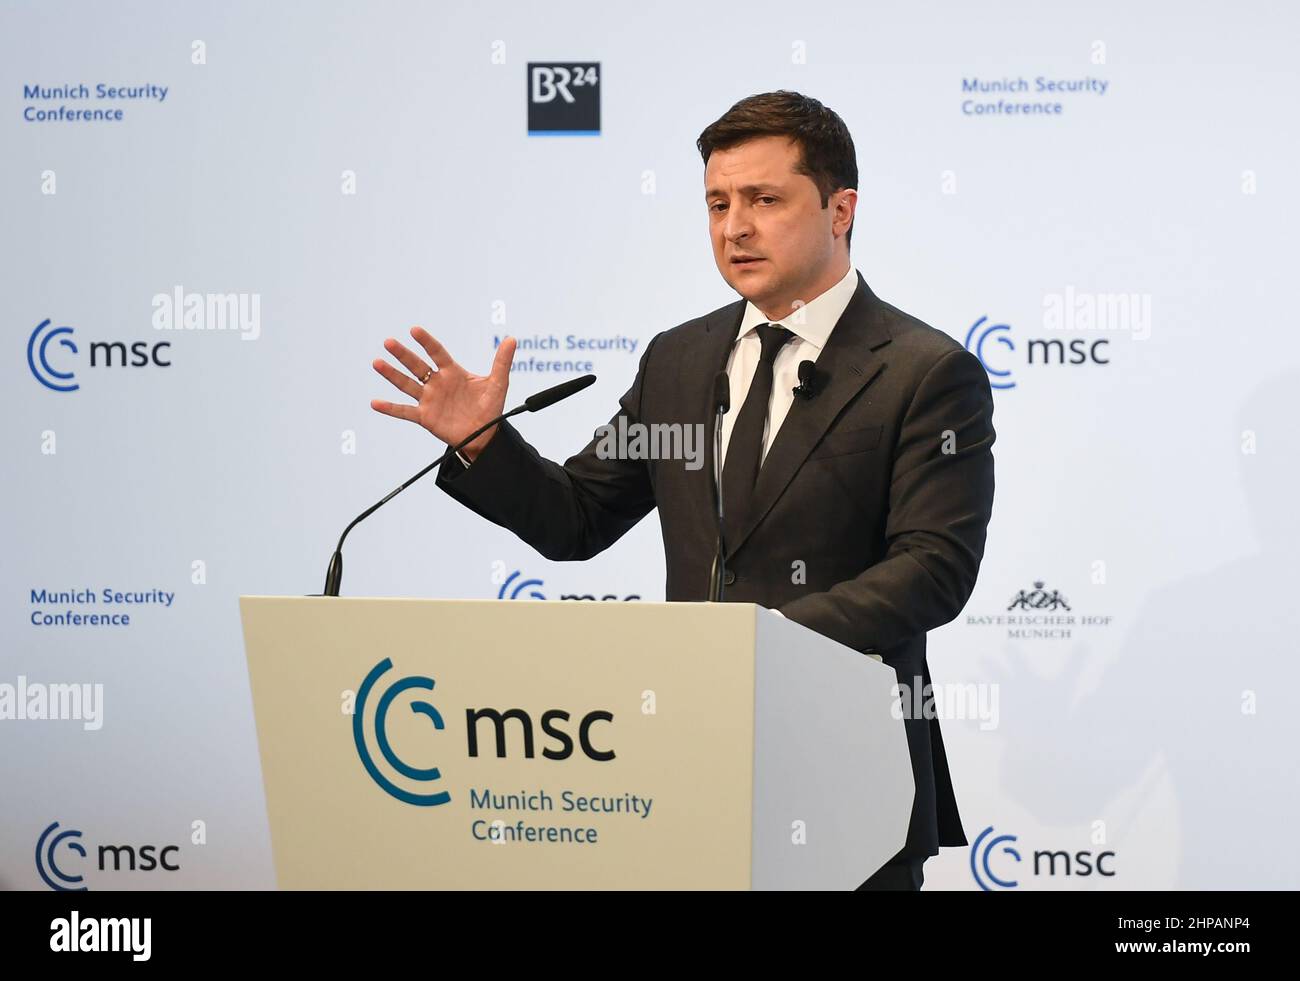 Munich, Germany. 19th Feb, 2022. Ukraine's President Volodymyr Zelensky makes a speech during the Munich Security Conference (MSC) held in Munich, Germany, Feb. 19, 2022. The 58th edition of the MSC opened here on Friday afternoon with a theme focusing on 'unlearning helplessness' against the backdrop of tensions in the Ukraine crisis. Credit: Lu Yang/Xinhua/Alamy Live News Stock Photo